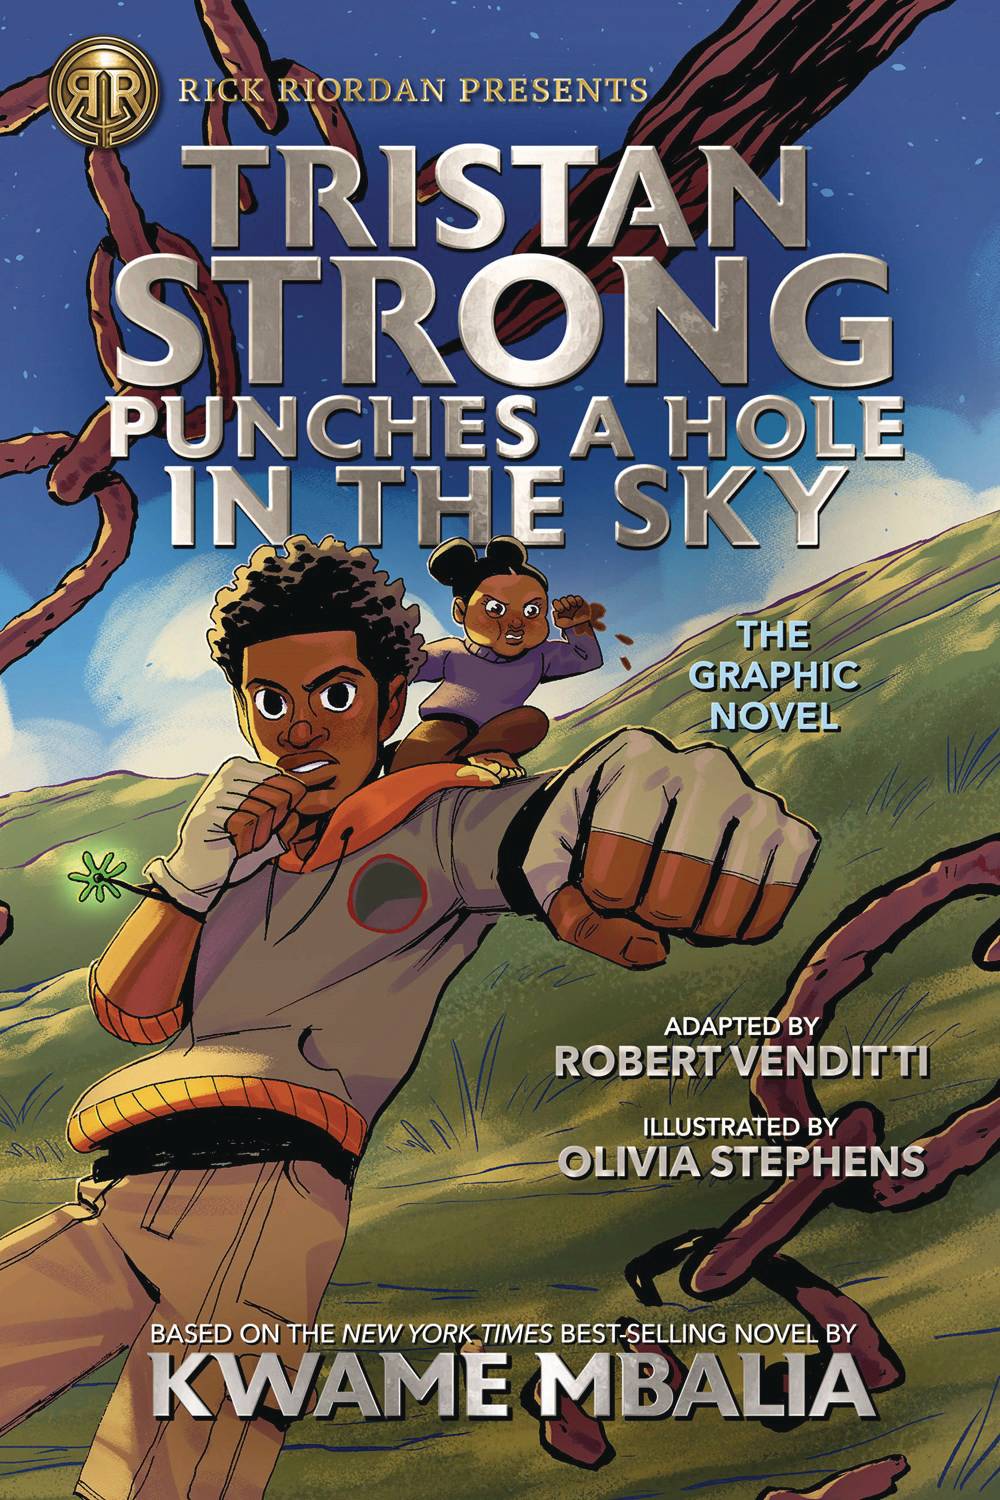 The One Stop Shop Comics & Games Tristan Strong Punches Hole In Sky Gn (C: 0-1-0) (08/10/2022) RICK RIORDAN PRESENTS